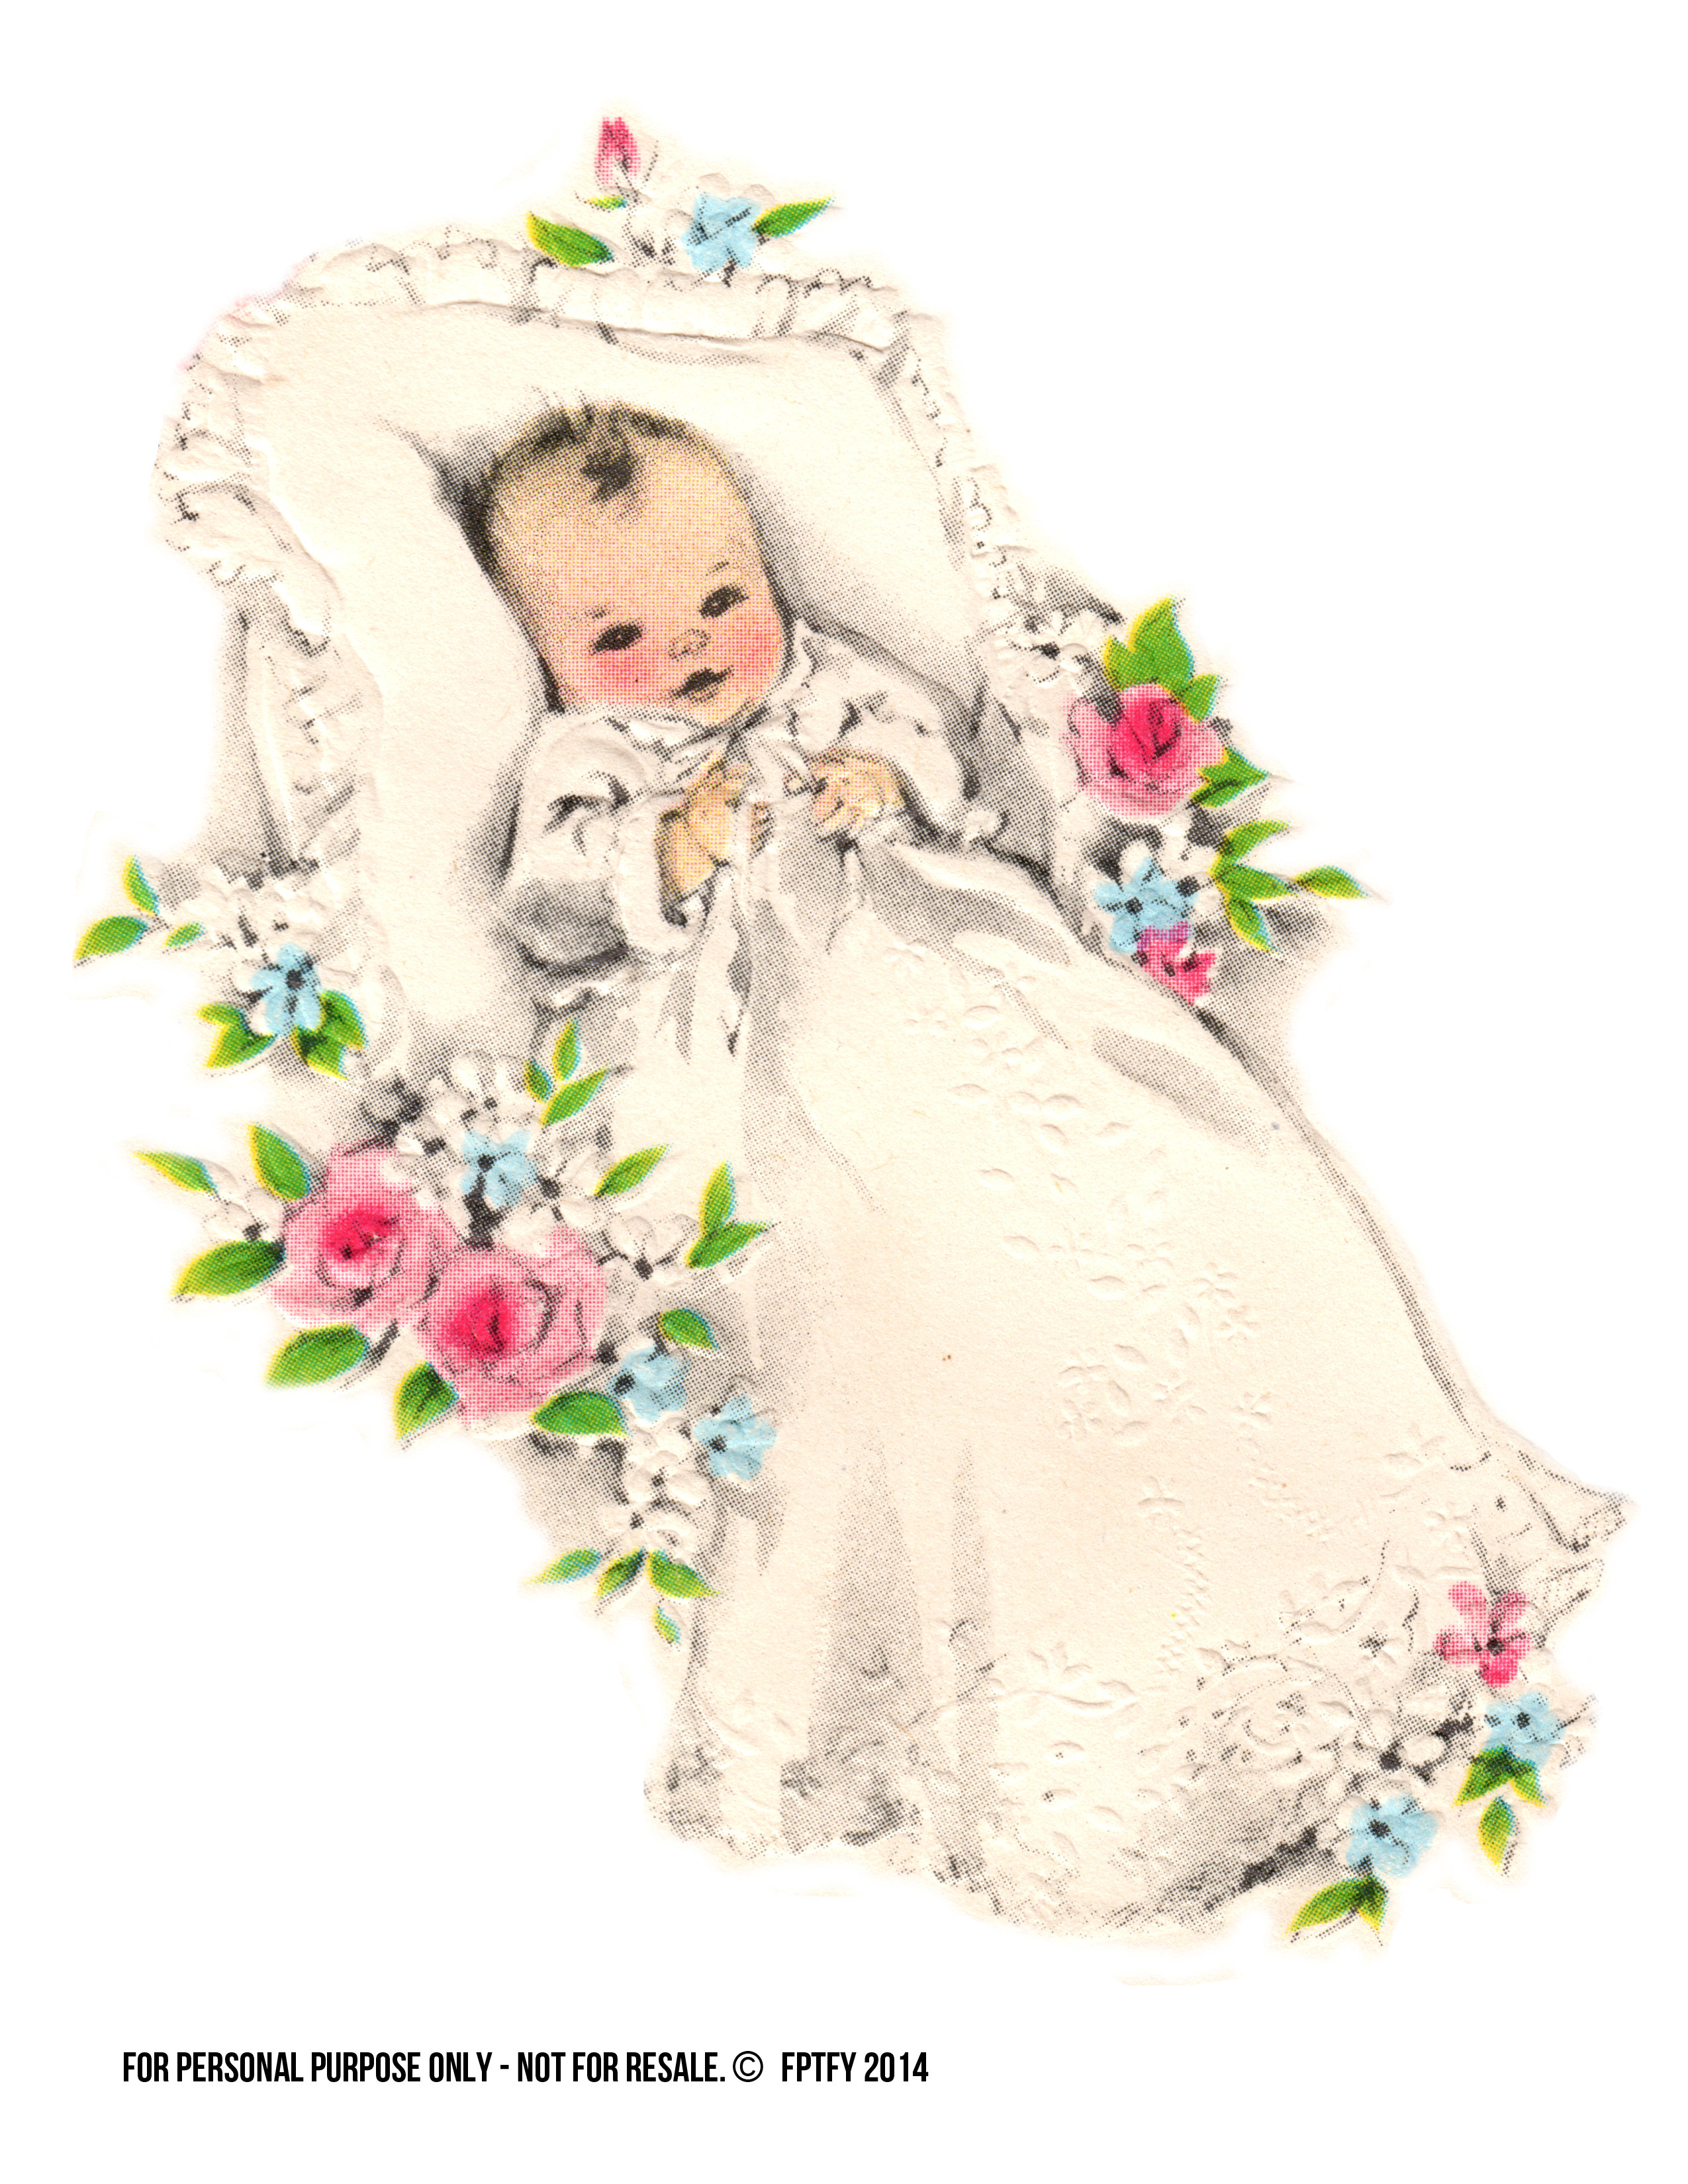 ... free-vintage-baby-clipart-by-fptfy-2